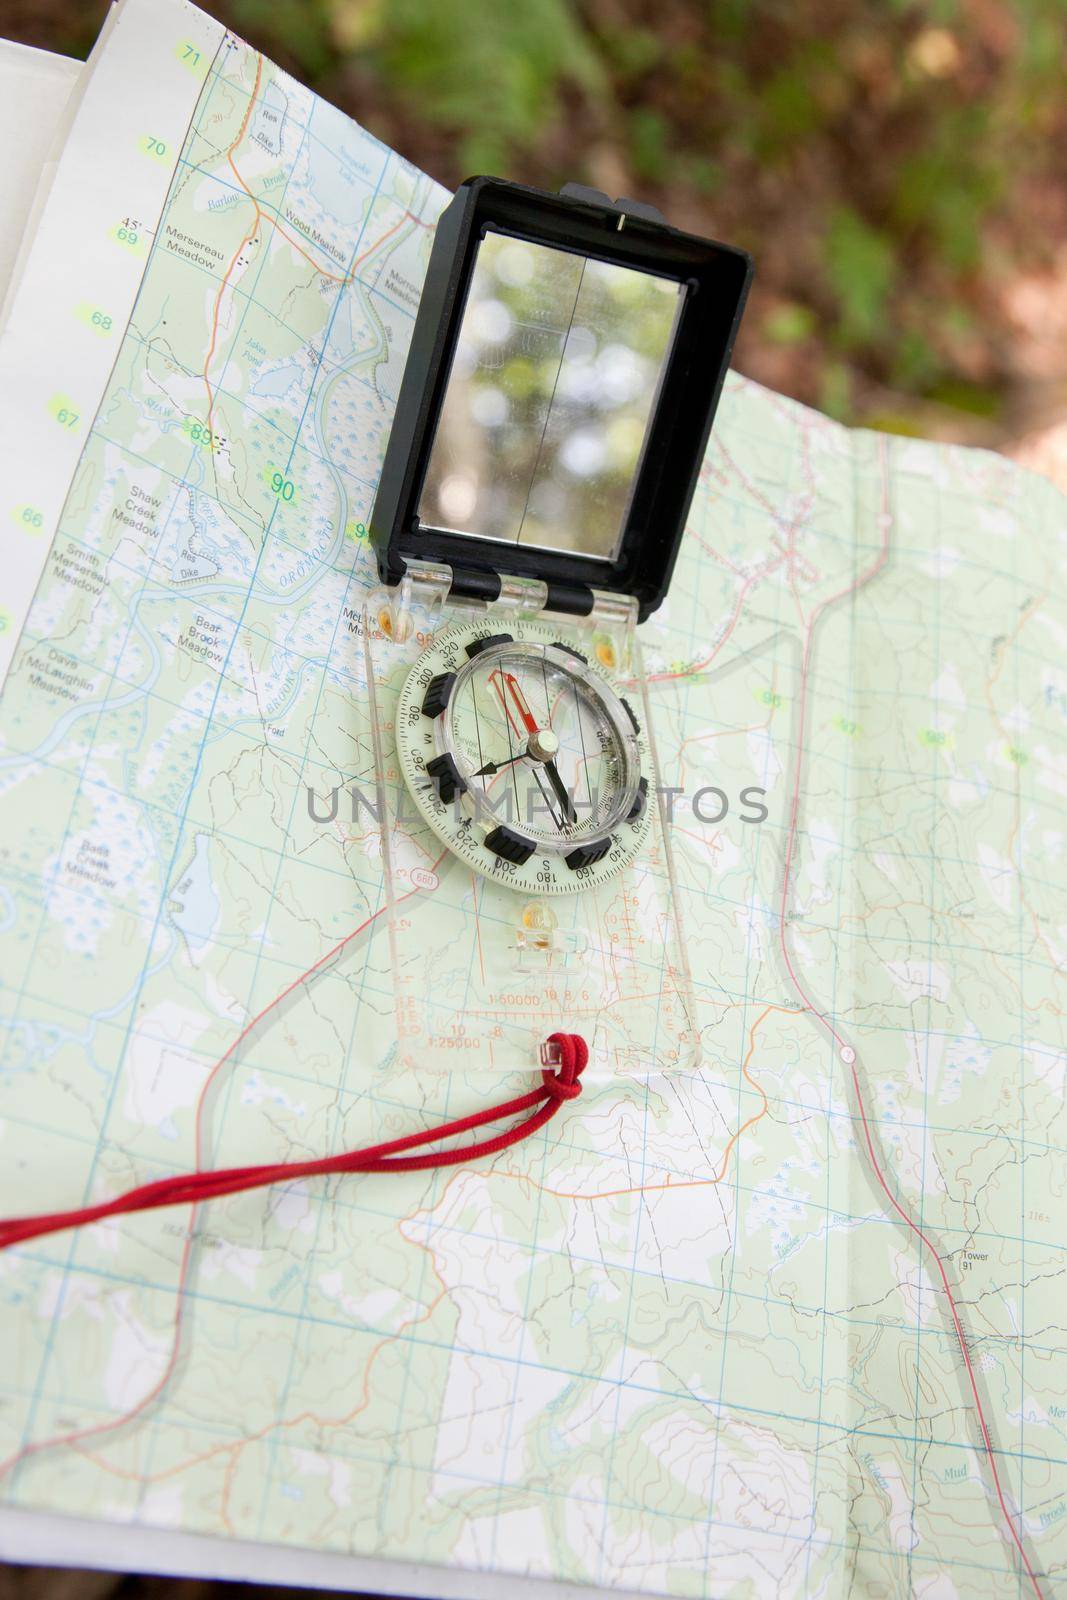 Outside a map with a digital compass shows the direction for a traveler in the forest 